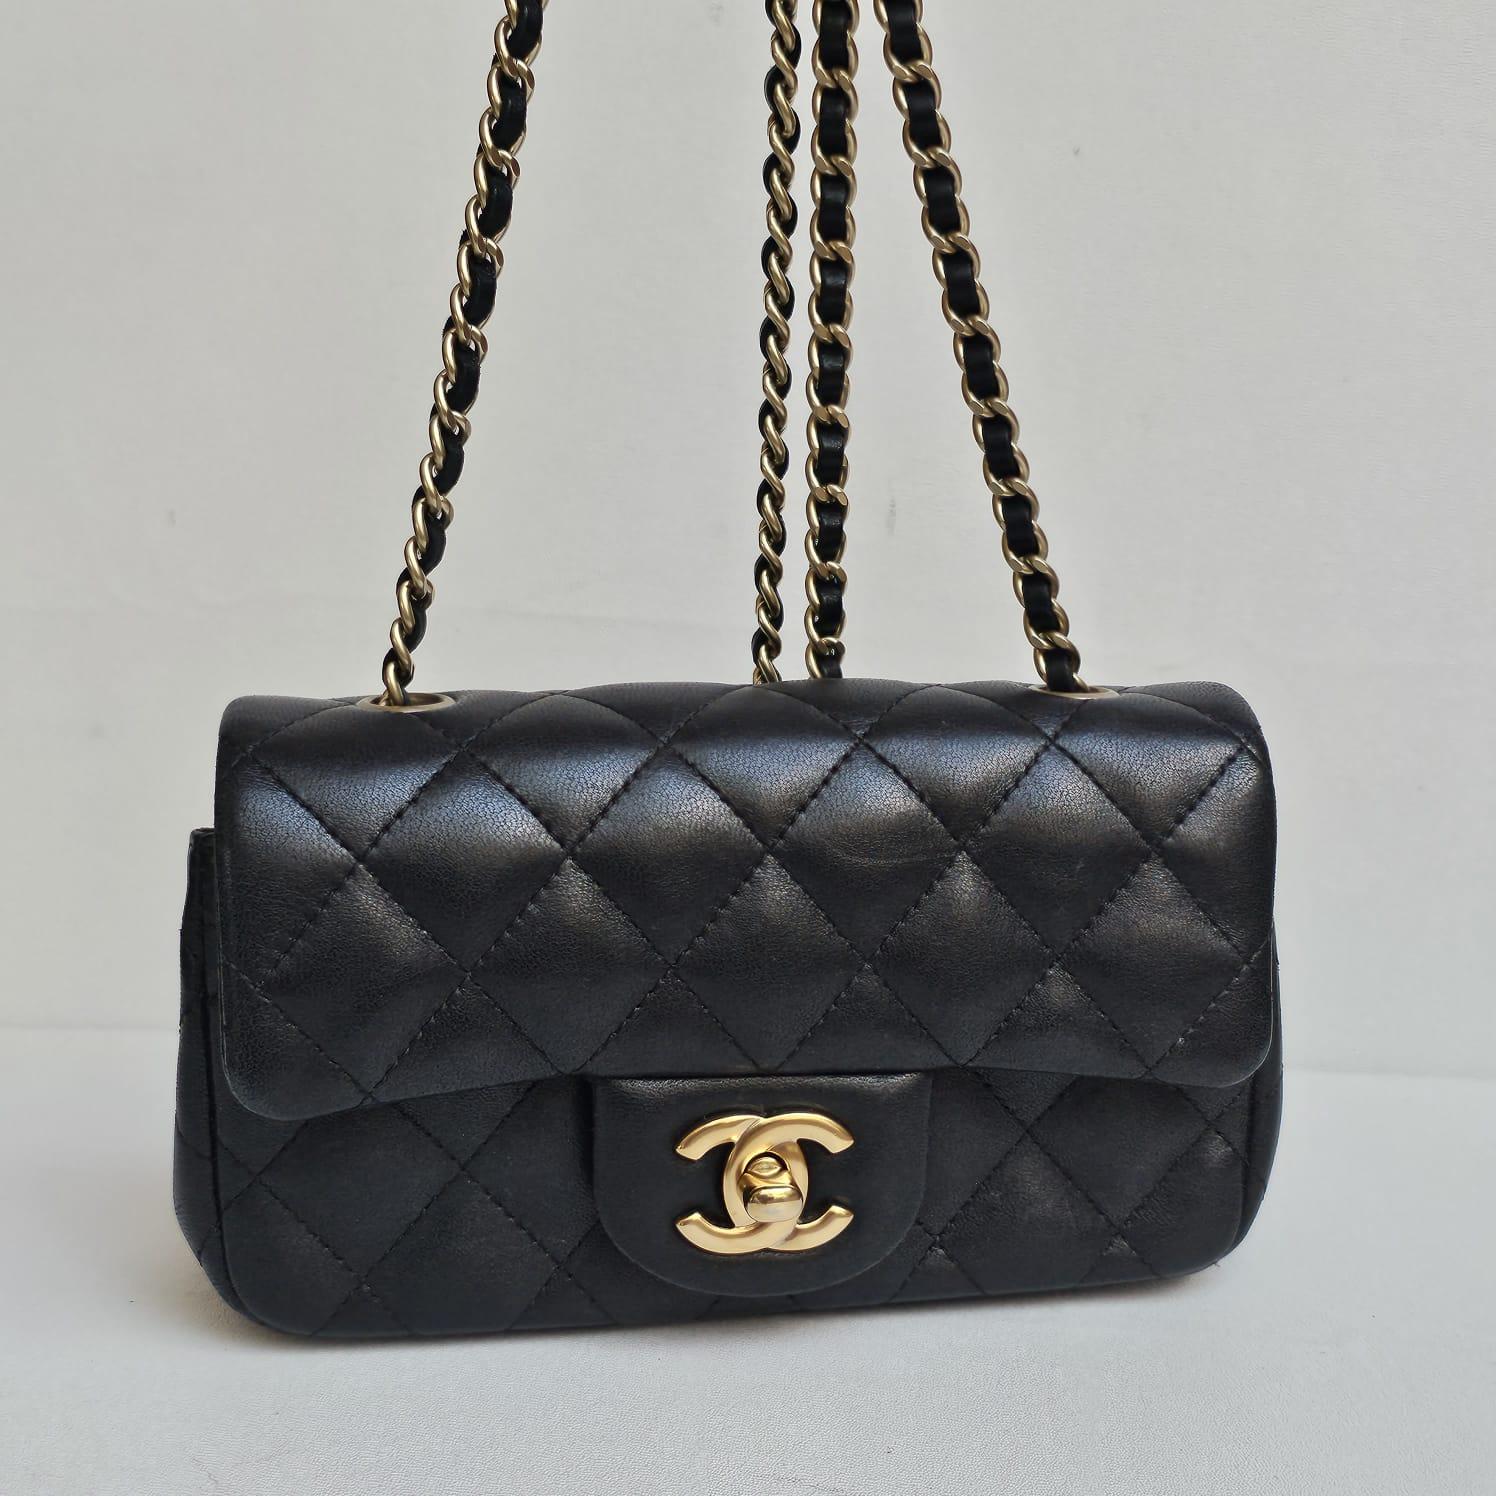 Chanel Black Lambskin Quilted Extra Mini Flap Bag For Sale 2